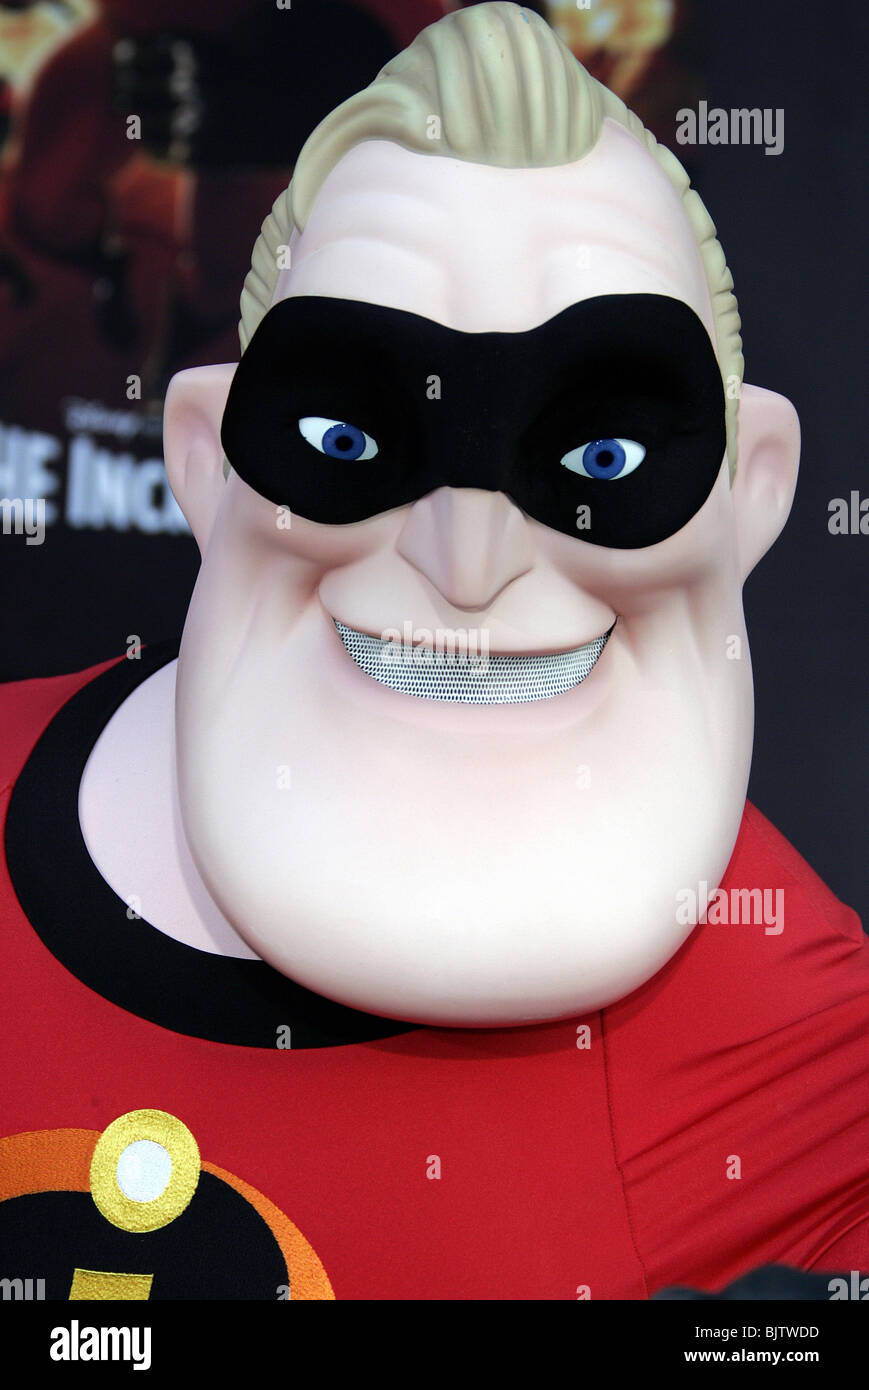 MR. INCREDIBLE THE INCREDIBLES WORLD PREMIER HOLLYWOOD LOS ANGELES USA 24 October 2004 Stock Photo